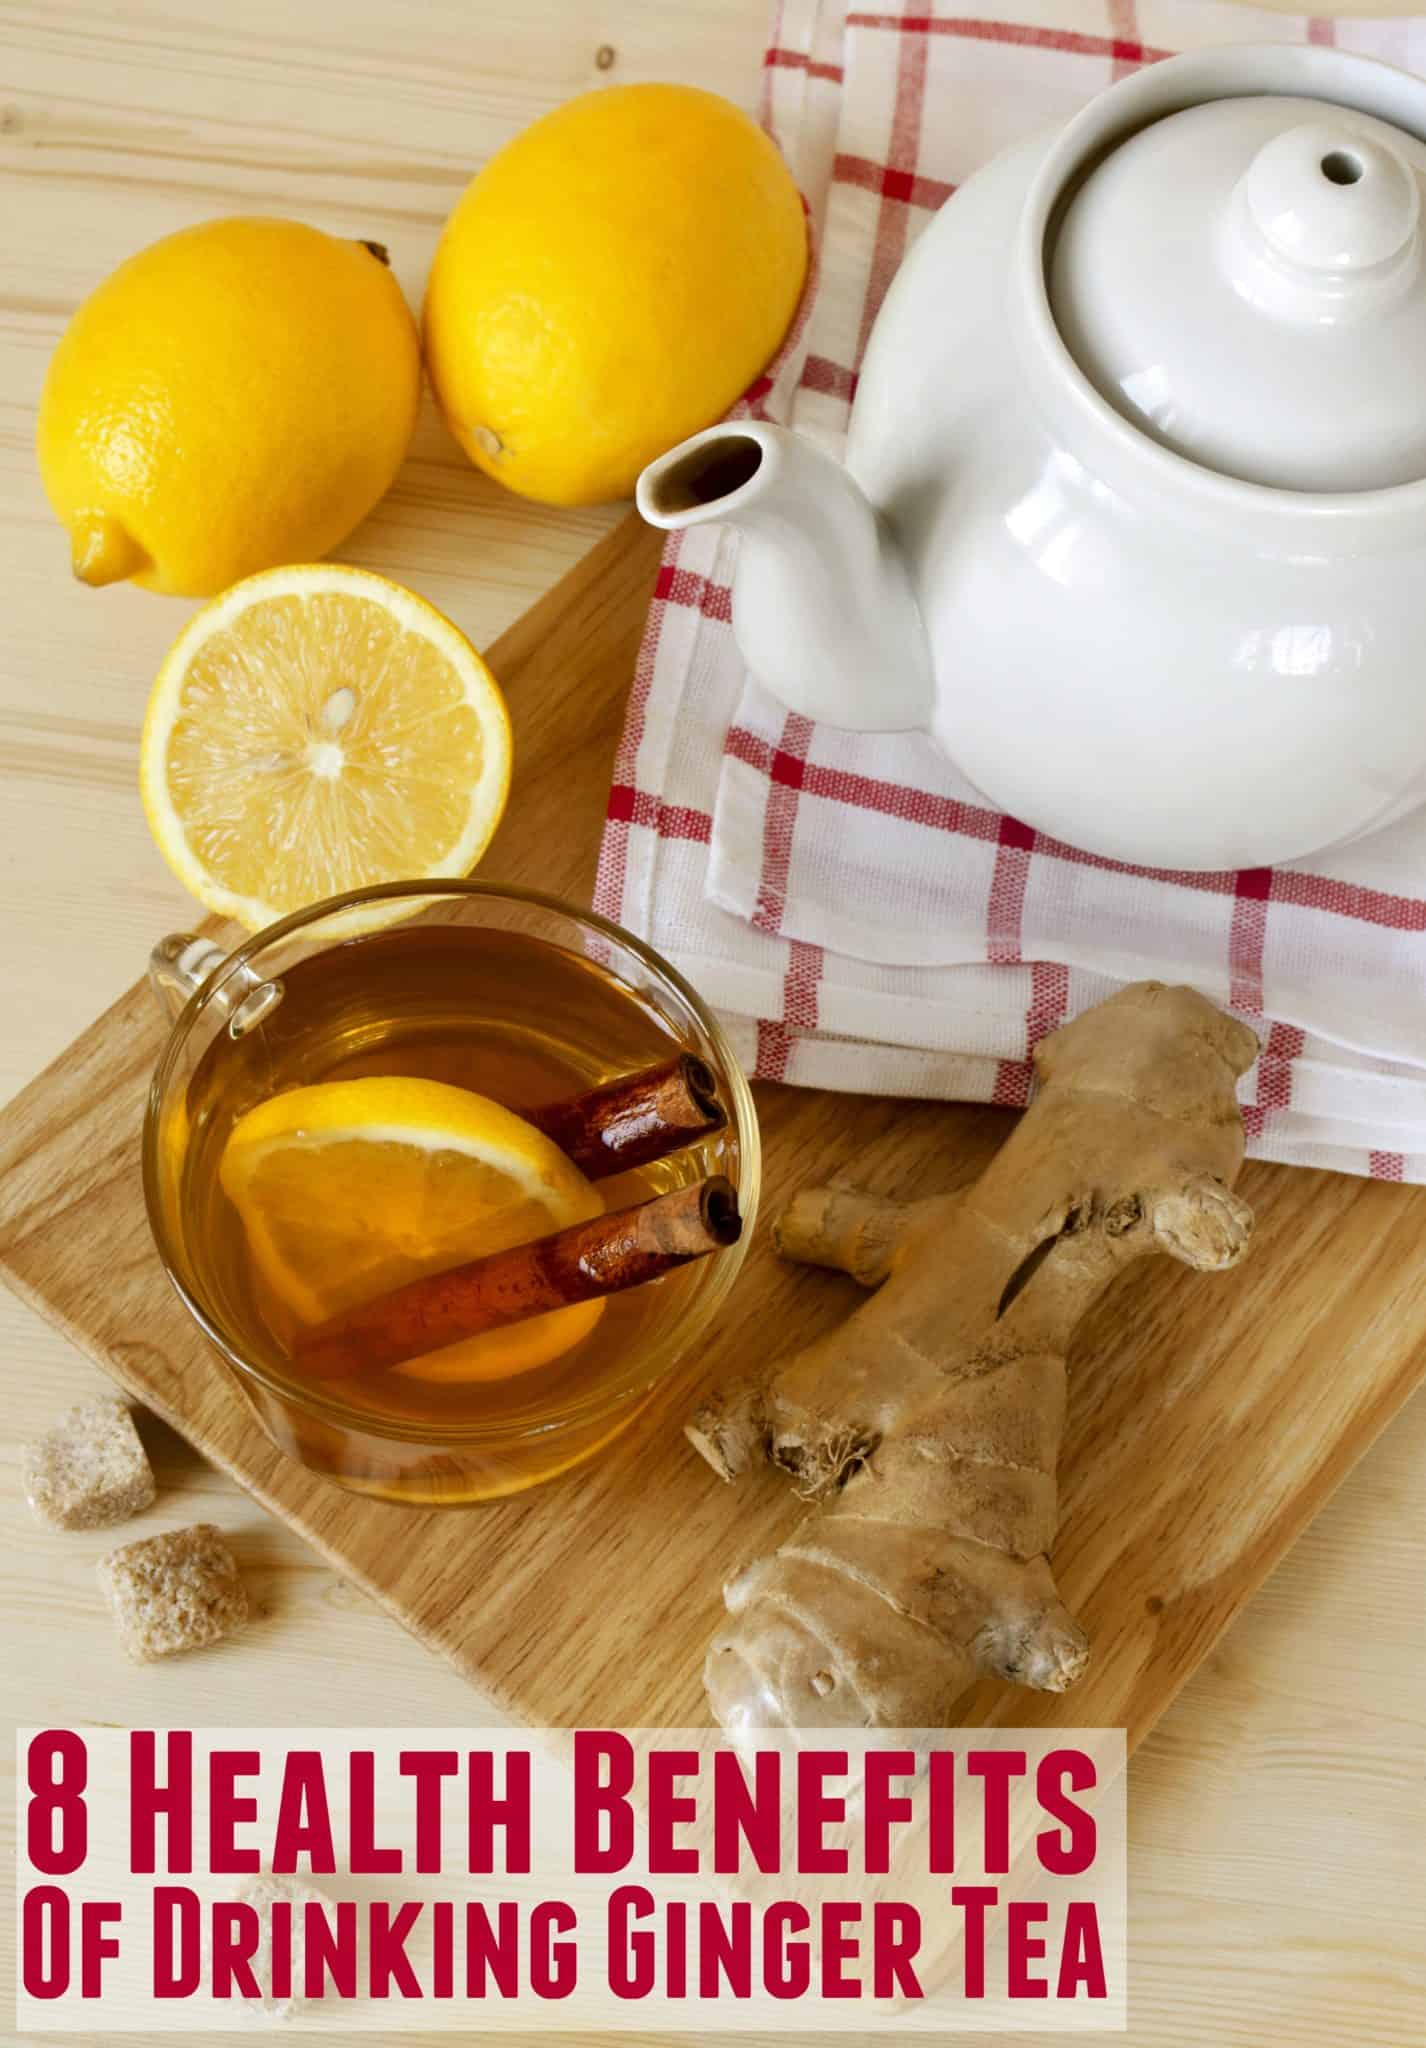 8 Amazing Benefits of Ginger Tea You're Missing Out On